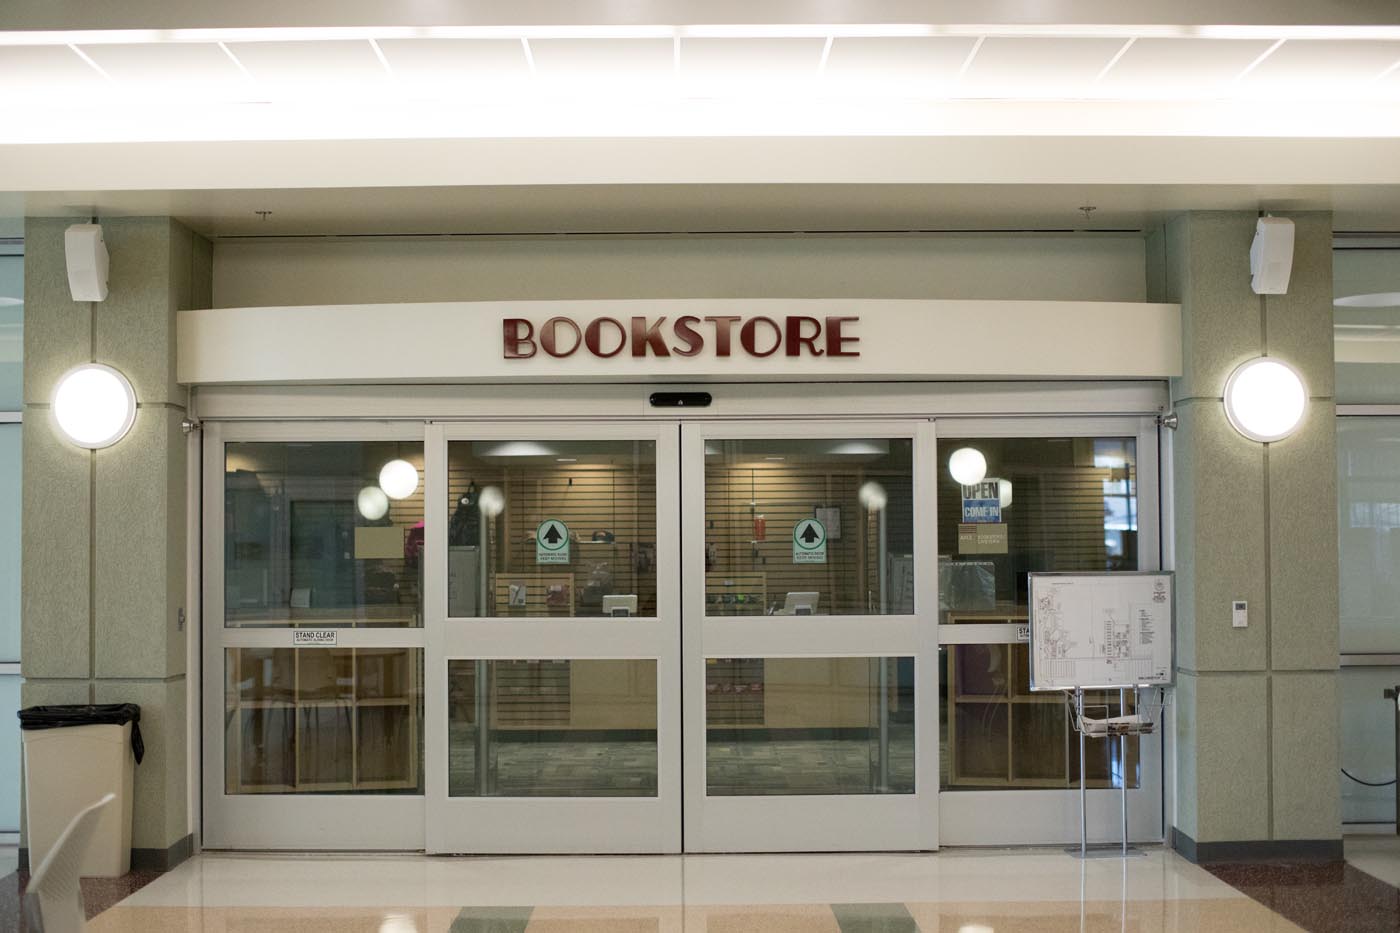 Image of bookstore